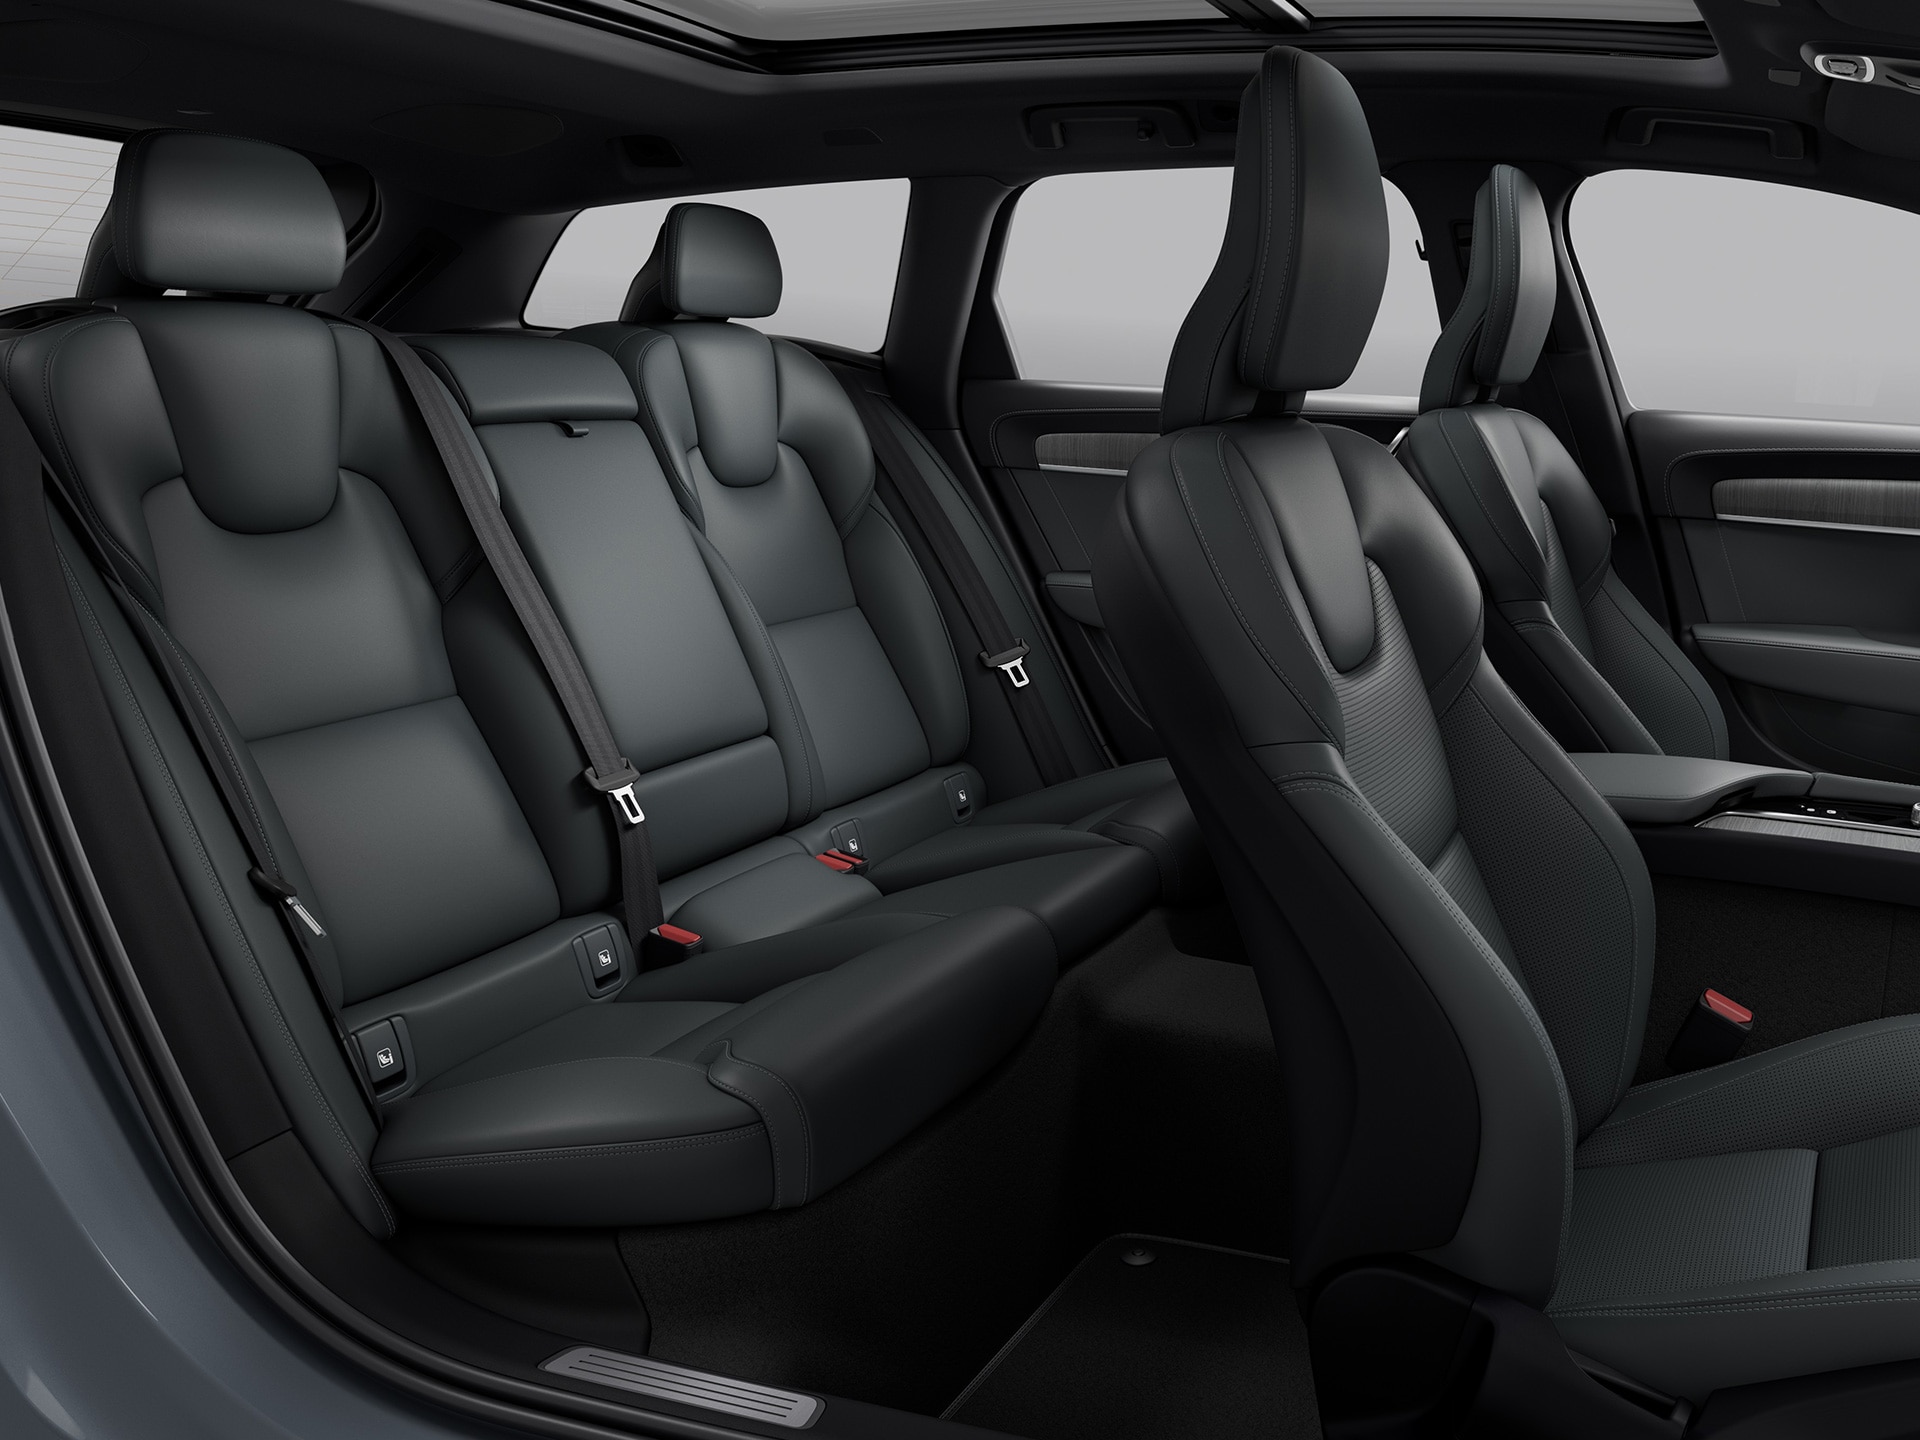 Versatile loading and seating options and roomy design in a Volvo V90 Cross Country.